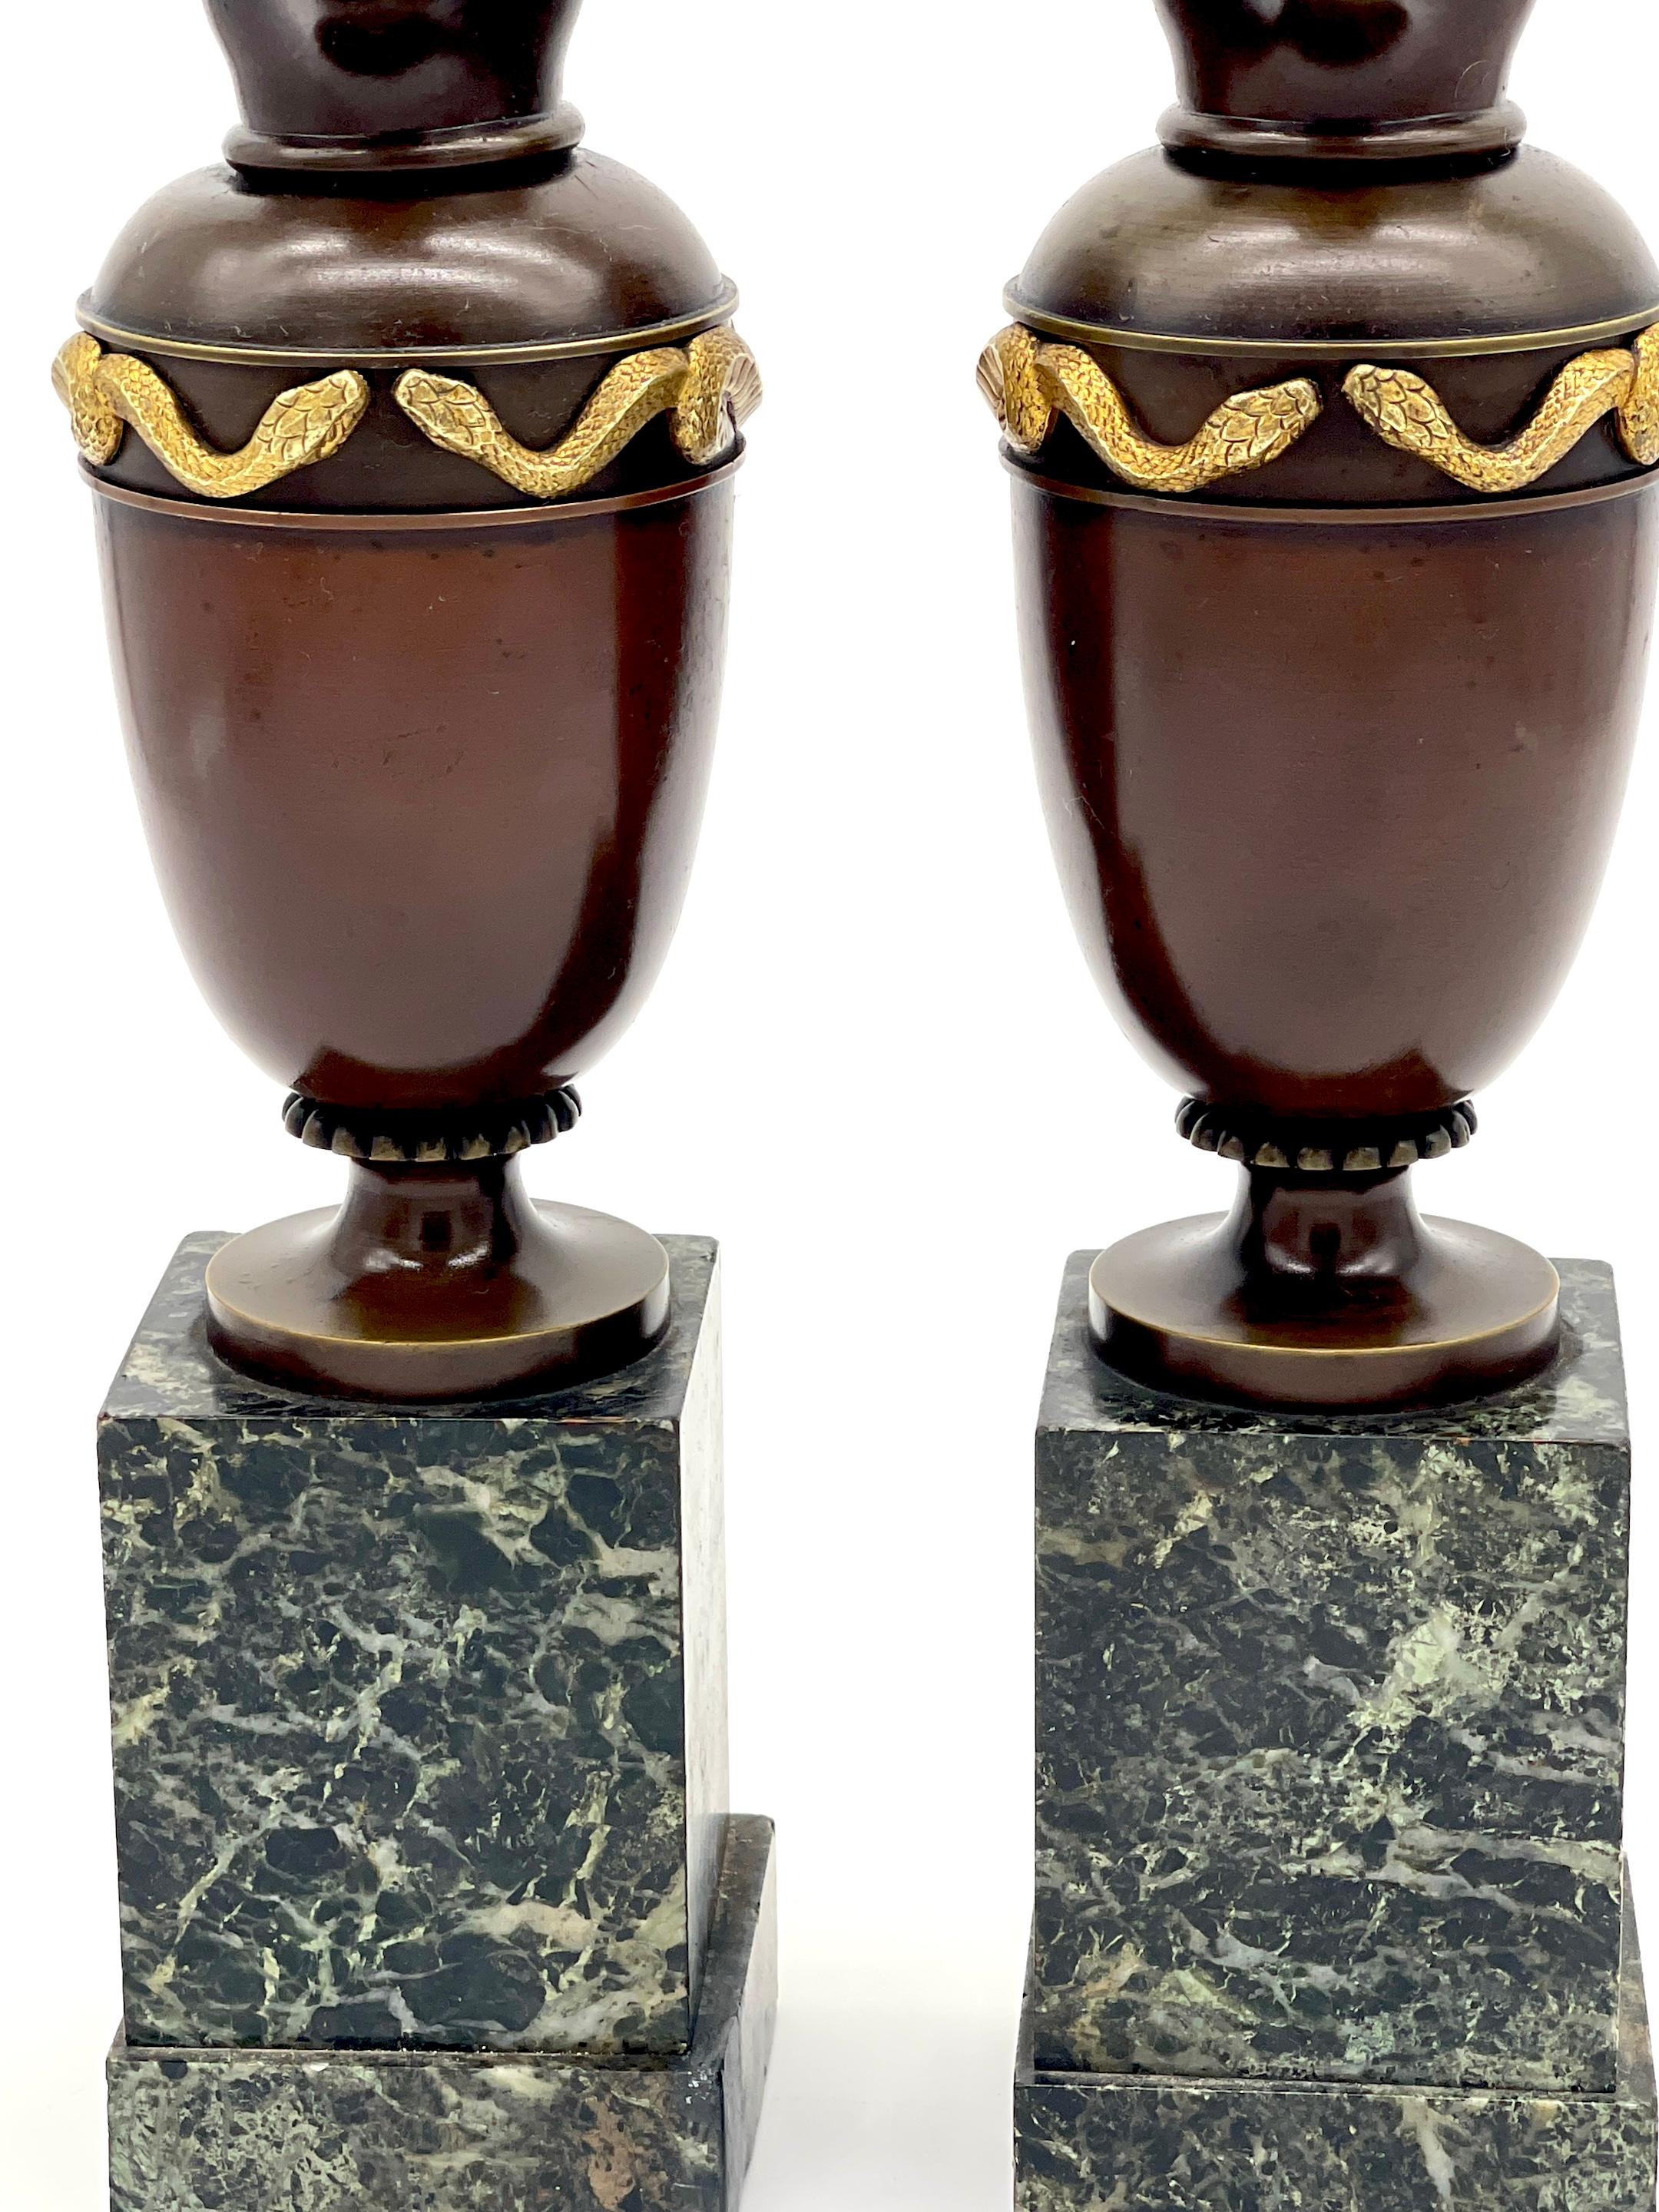 Pair  of Roman Grand Tour Bronze & Ormolu Serpent Motif Vases/ Ewers/Urns  In Good Condition For Sale In West Palm Beach, FL